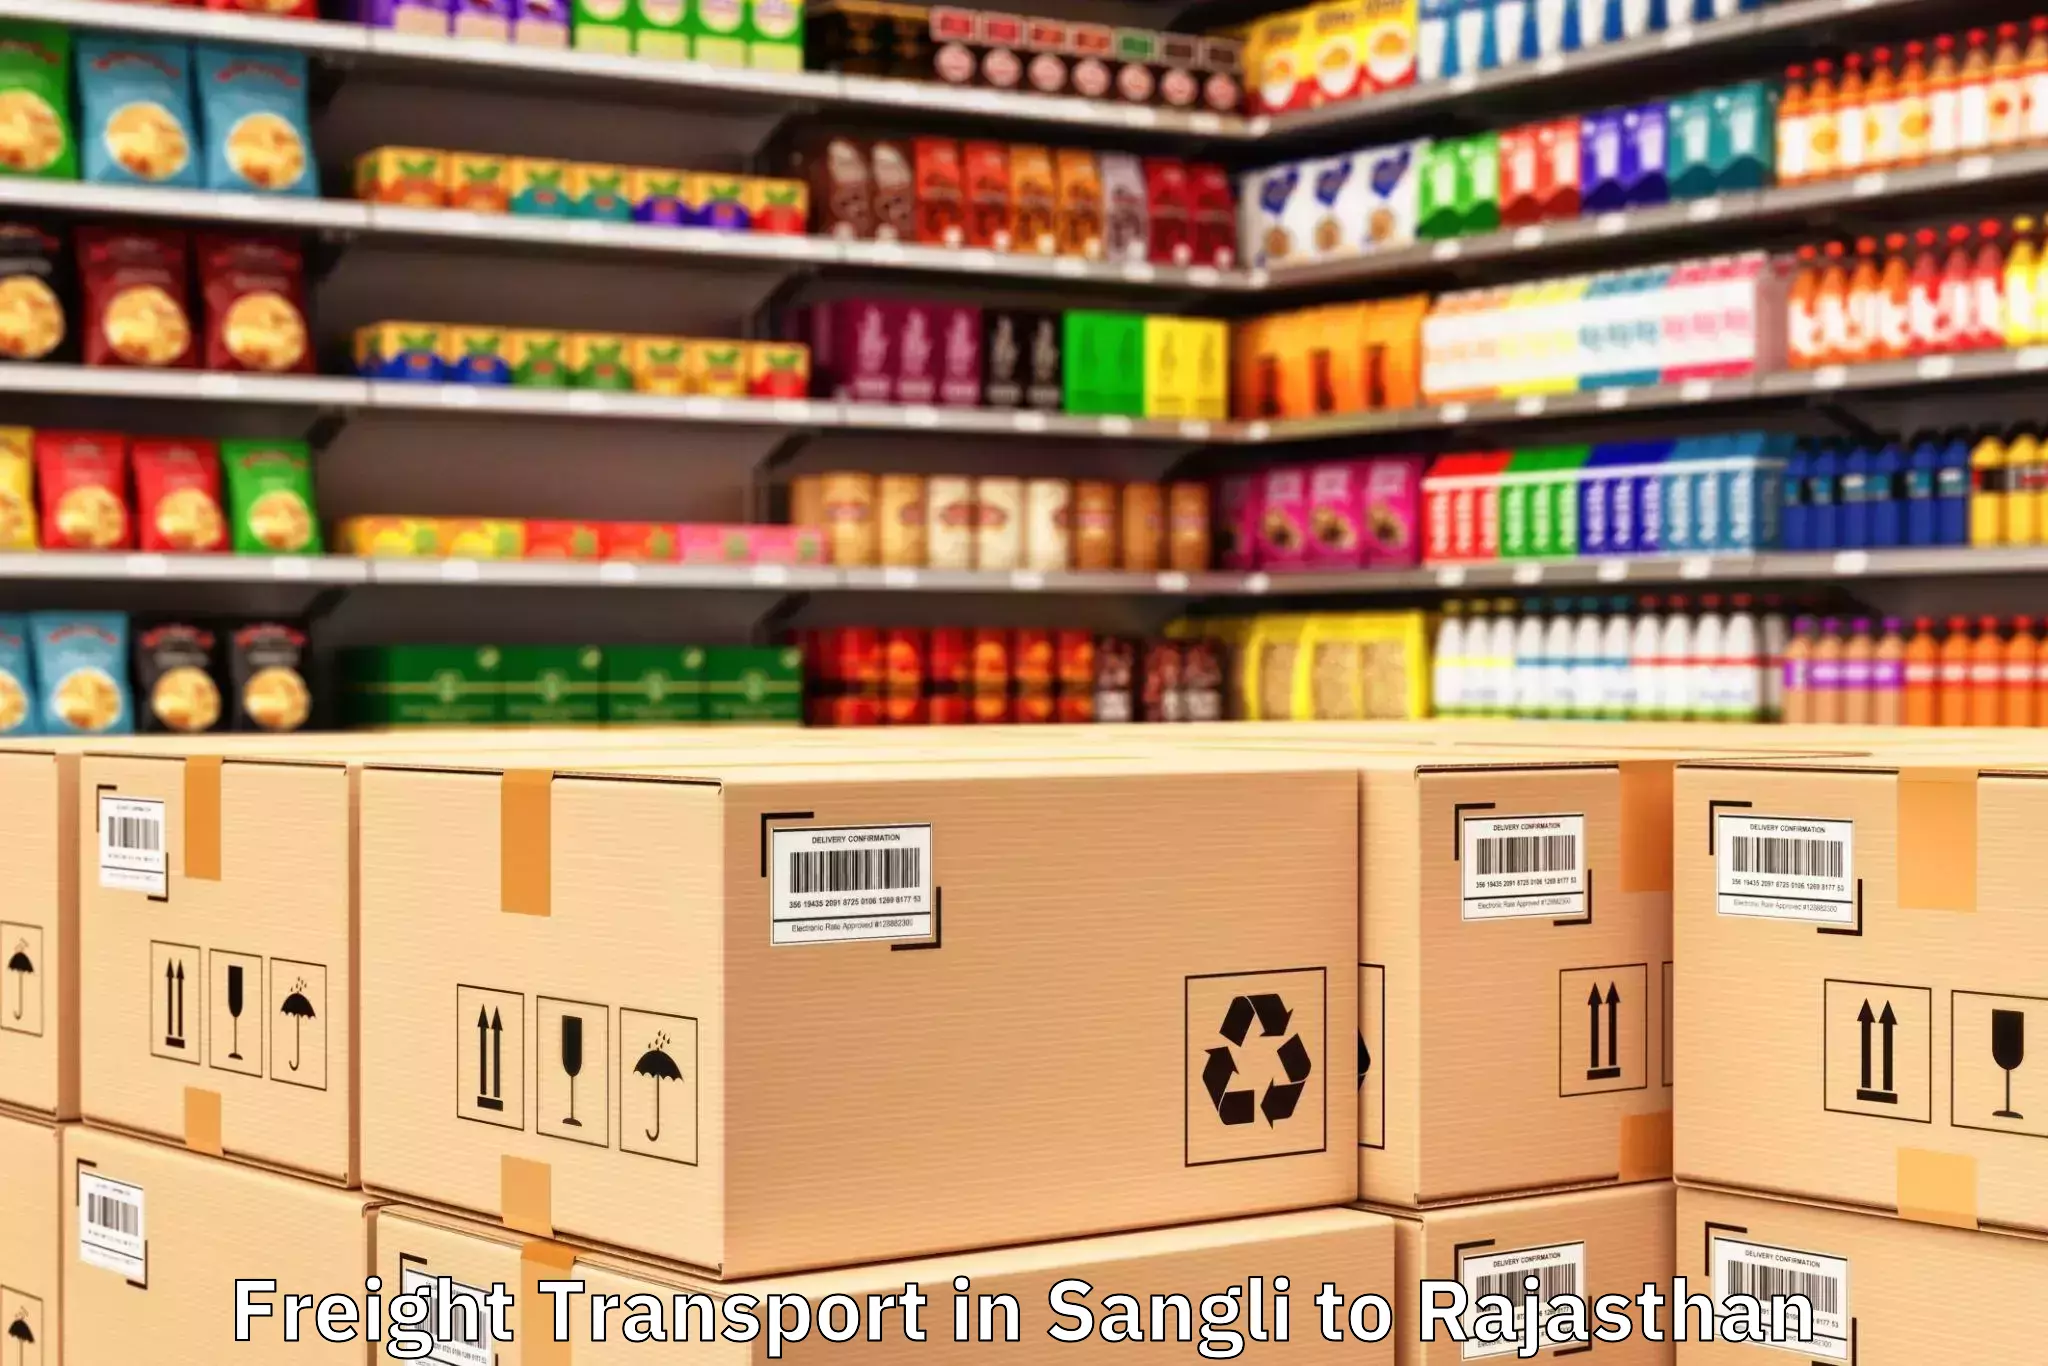 Top Sangli to Rajasthan Freight Transport Available